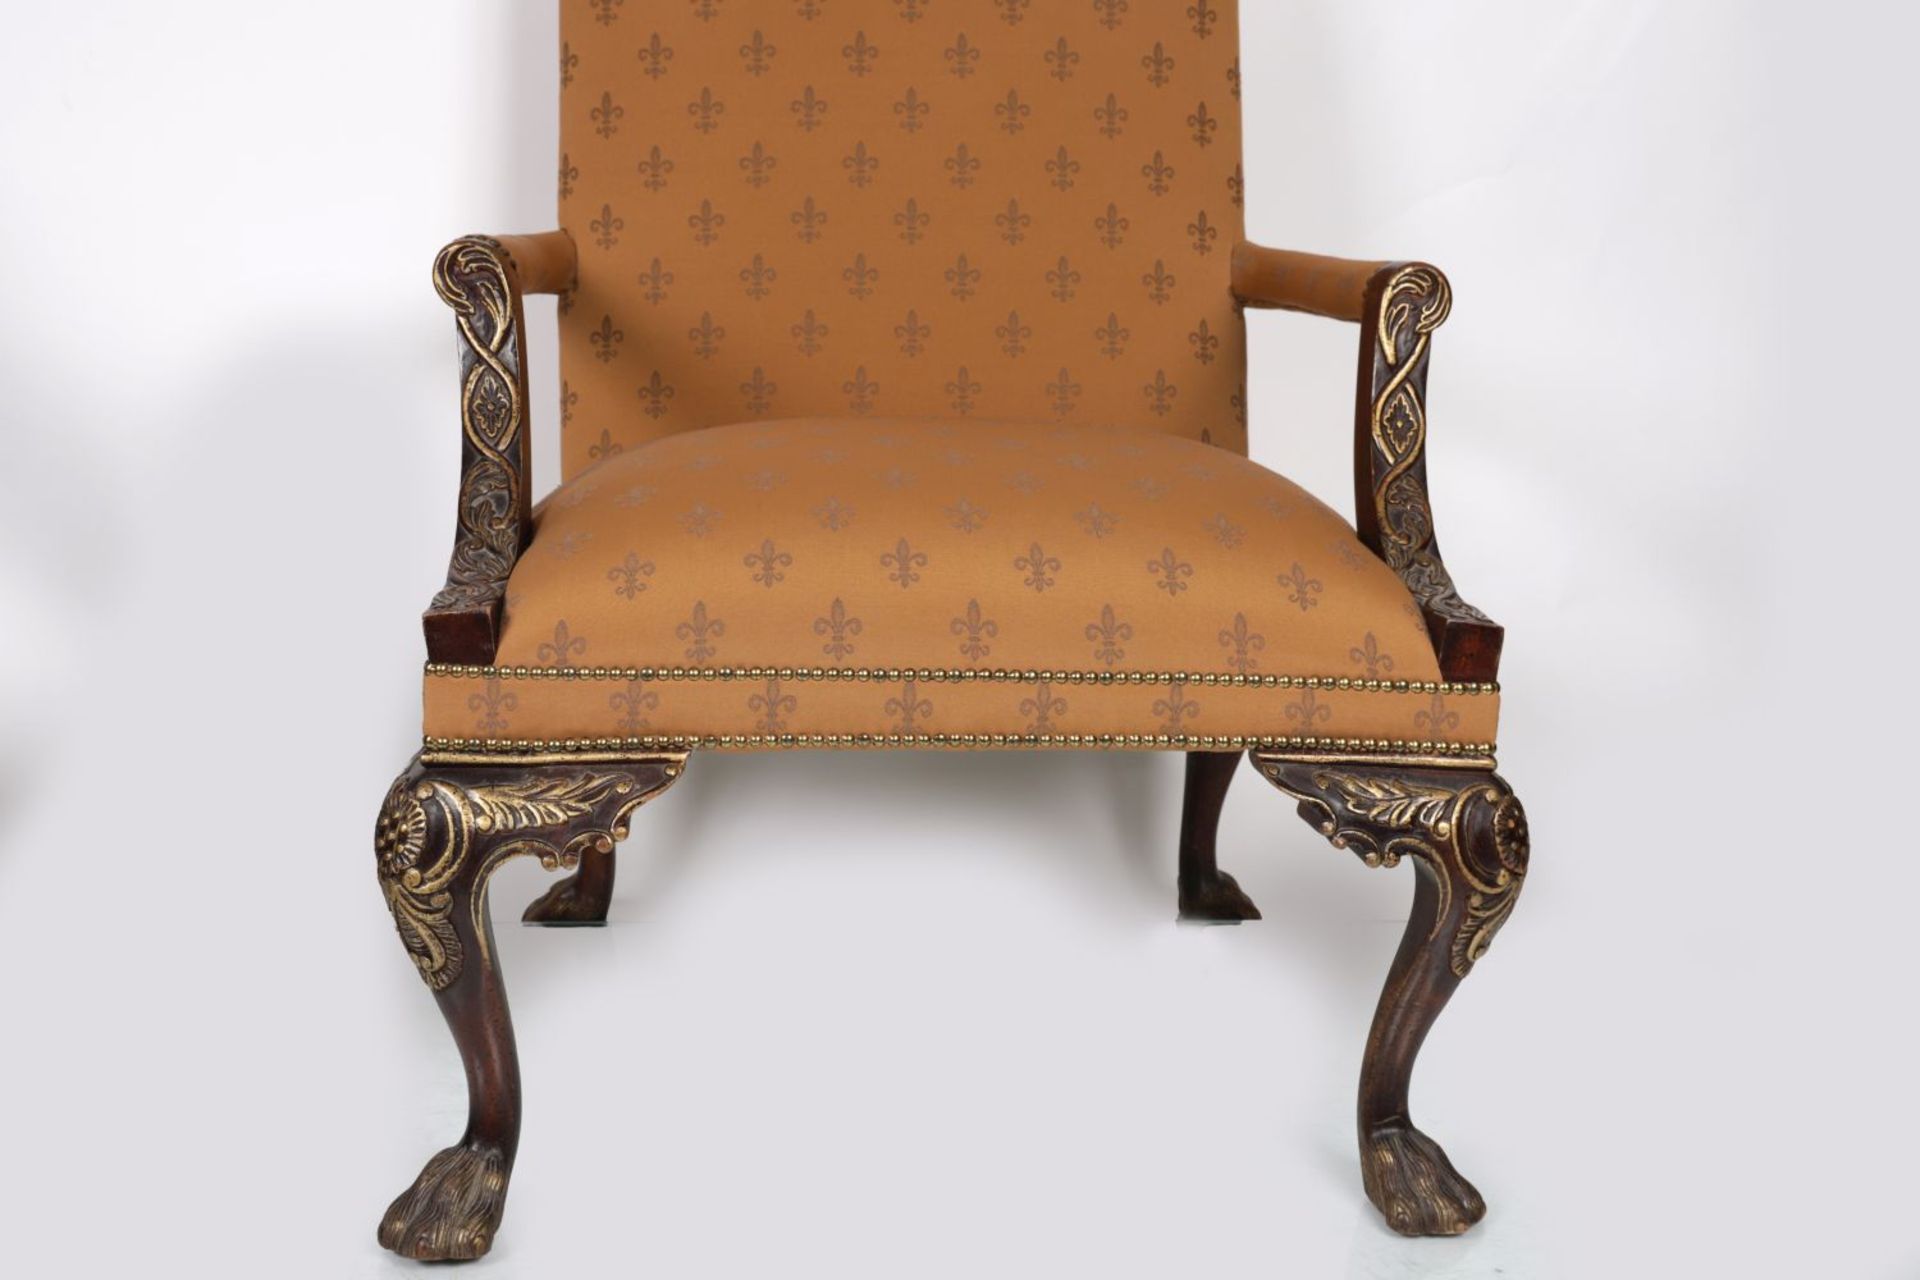 PAIR LATE 19TH-CENTURY GAINSBOROUGH CHAIRS - Image 2 of 3